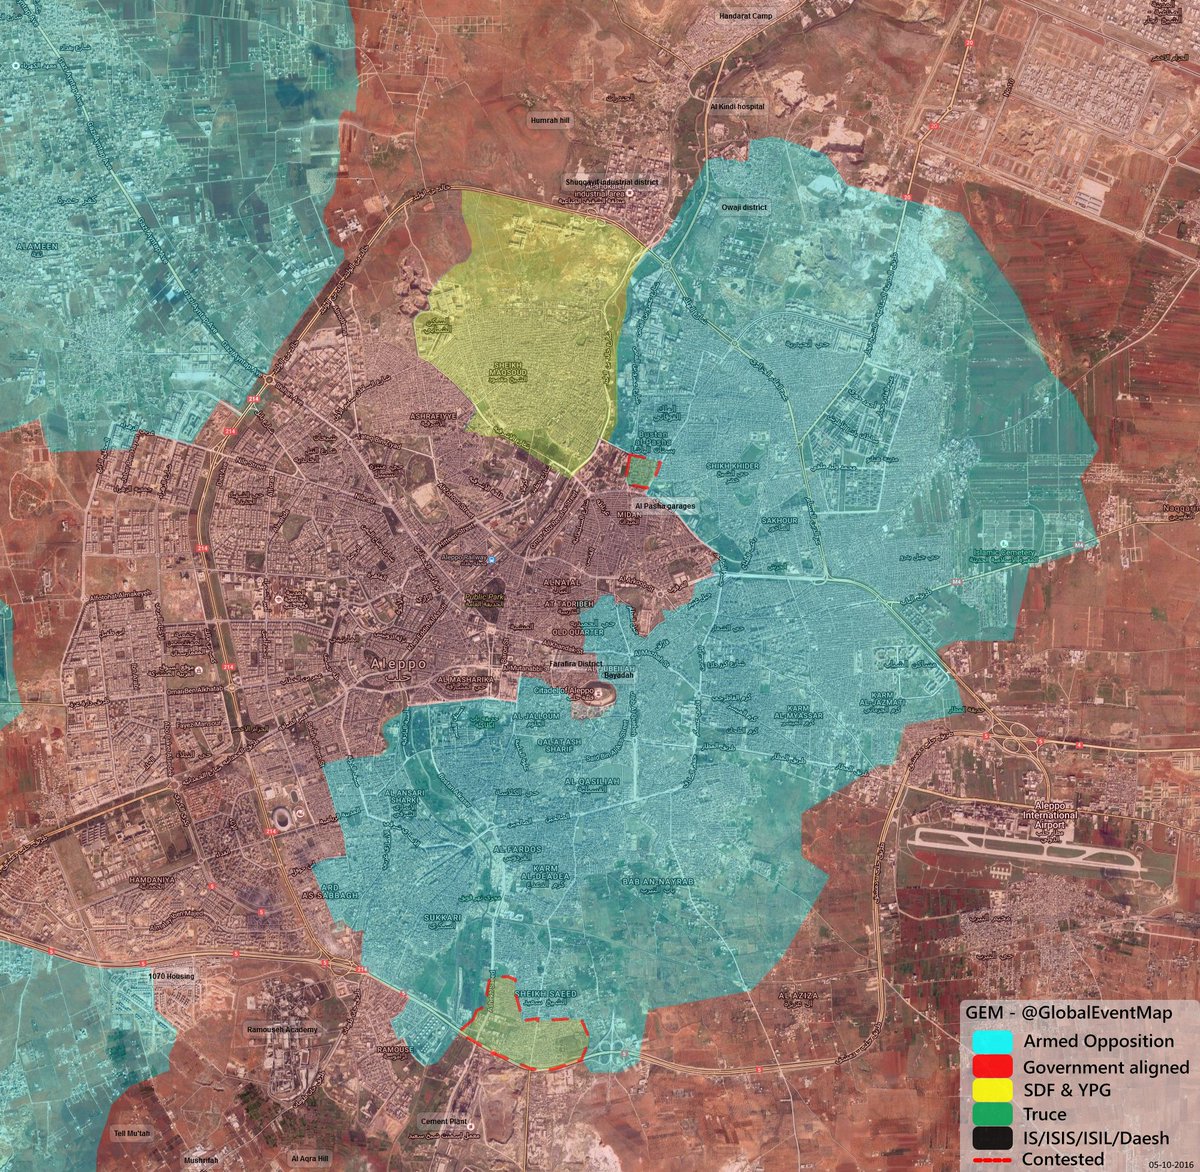 Overview of Military Situation in Aleppo City, October 6, 2016